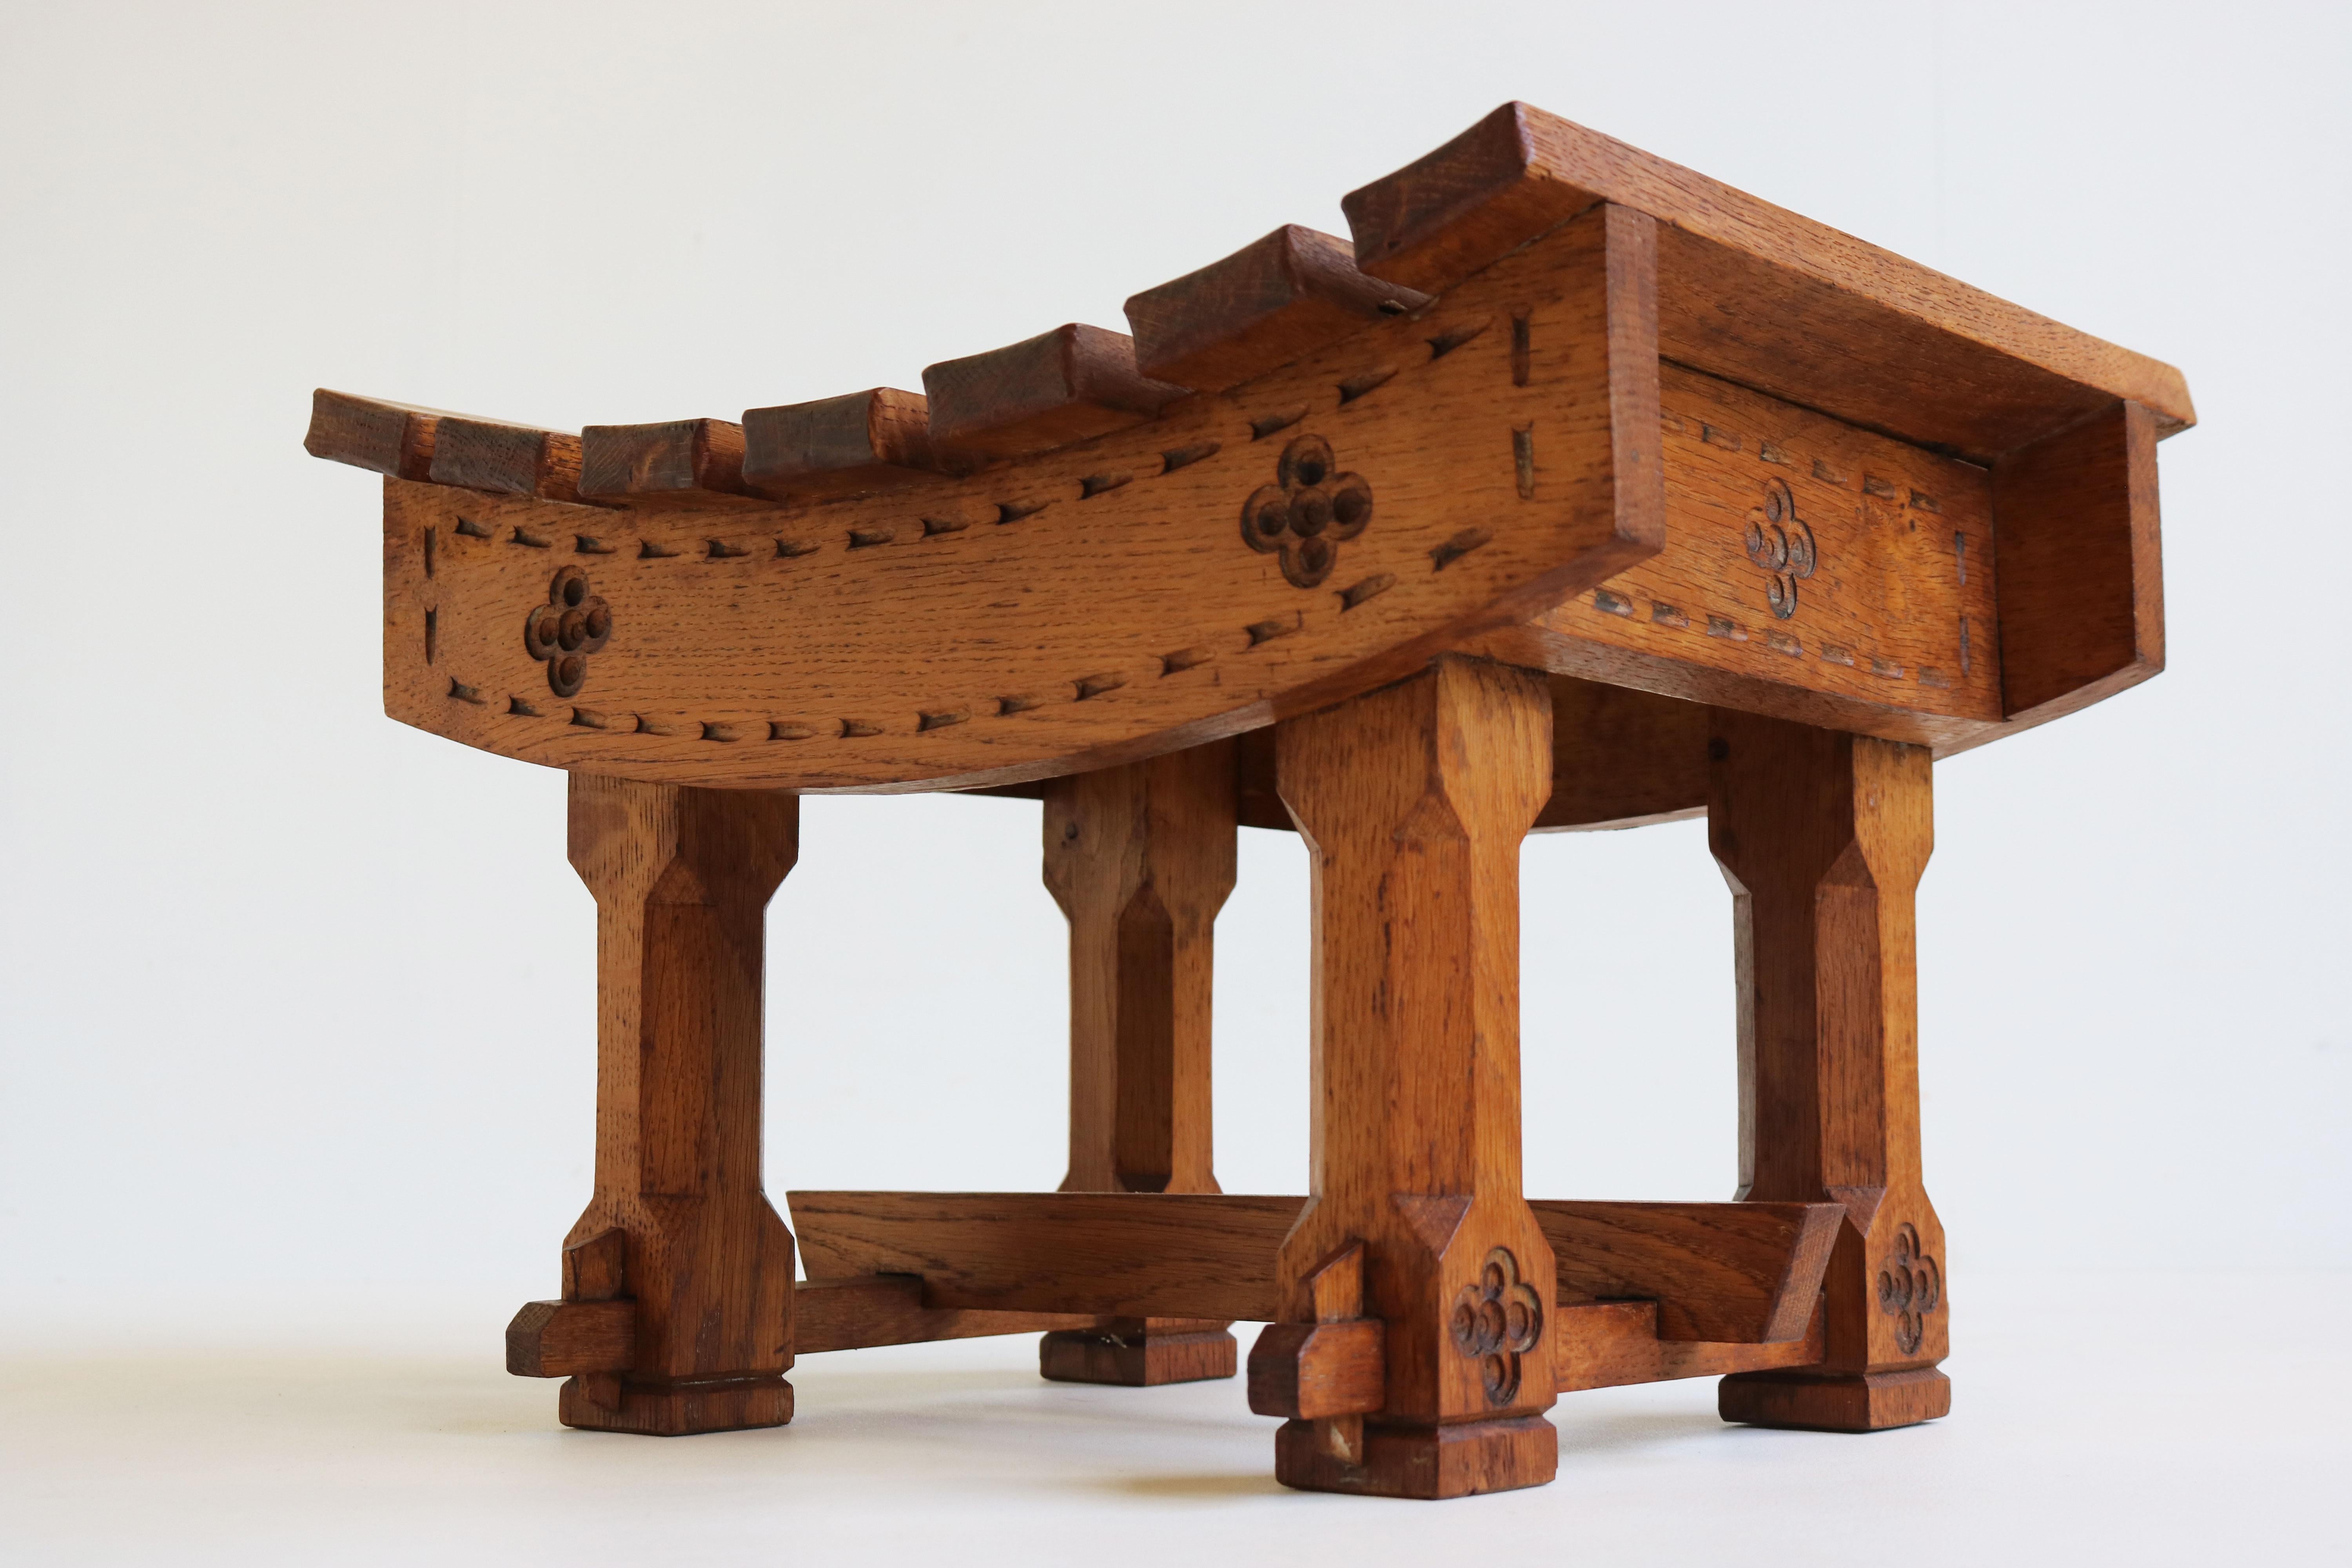 Masterfully crafted Antique Dutch Arts & Crafts footstool / stool made in the 1900s. 
Gorgeous European oak with amazing patina, richly decorated with carvings. 
The seat is fully bent & combined with the wood joints a perfect display of